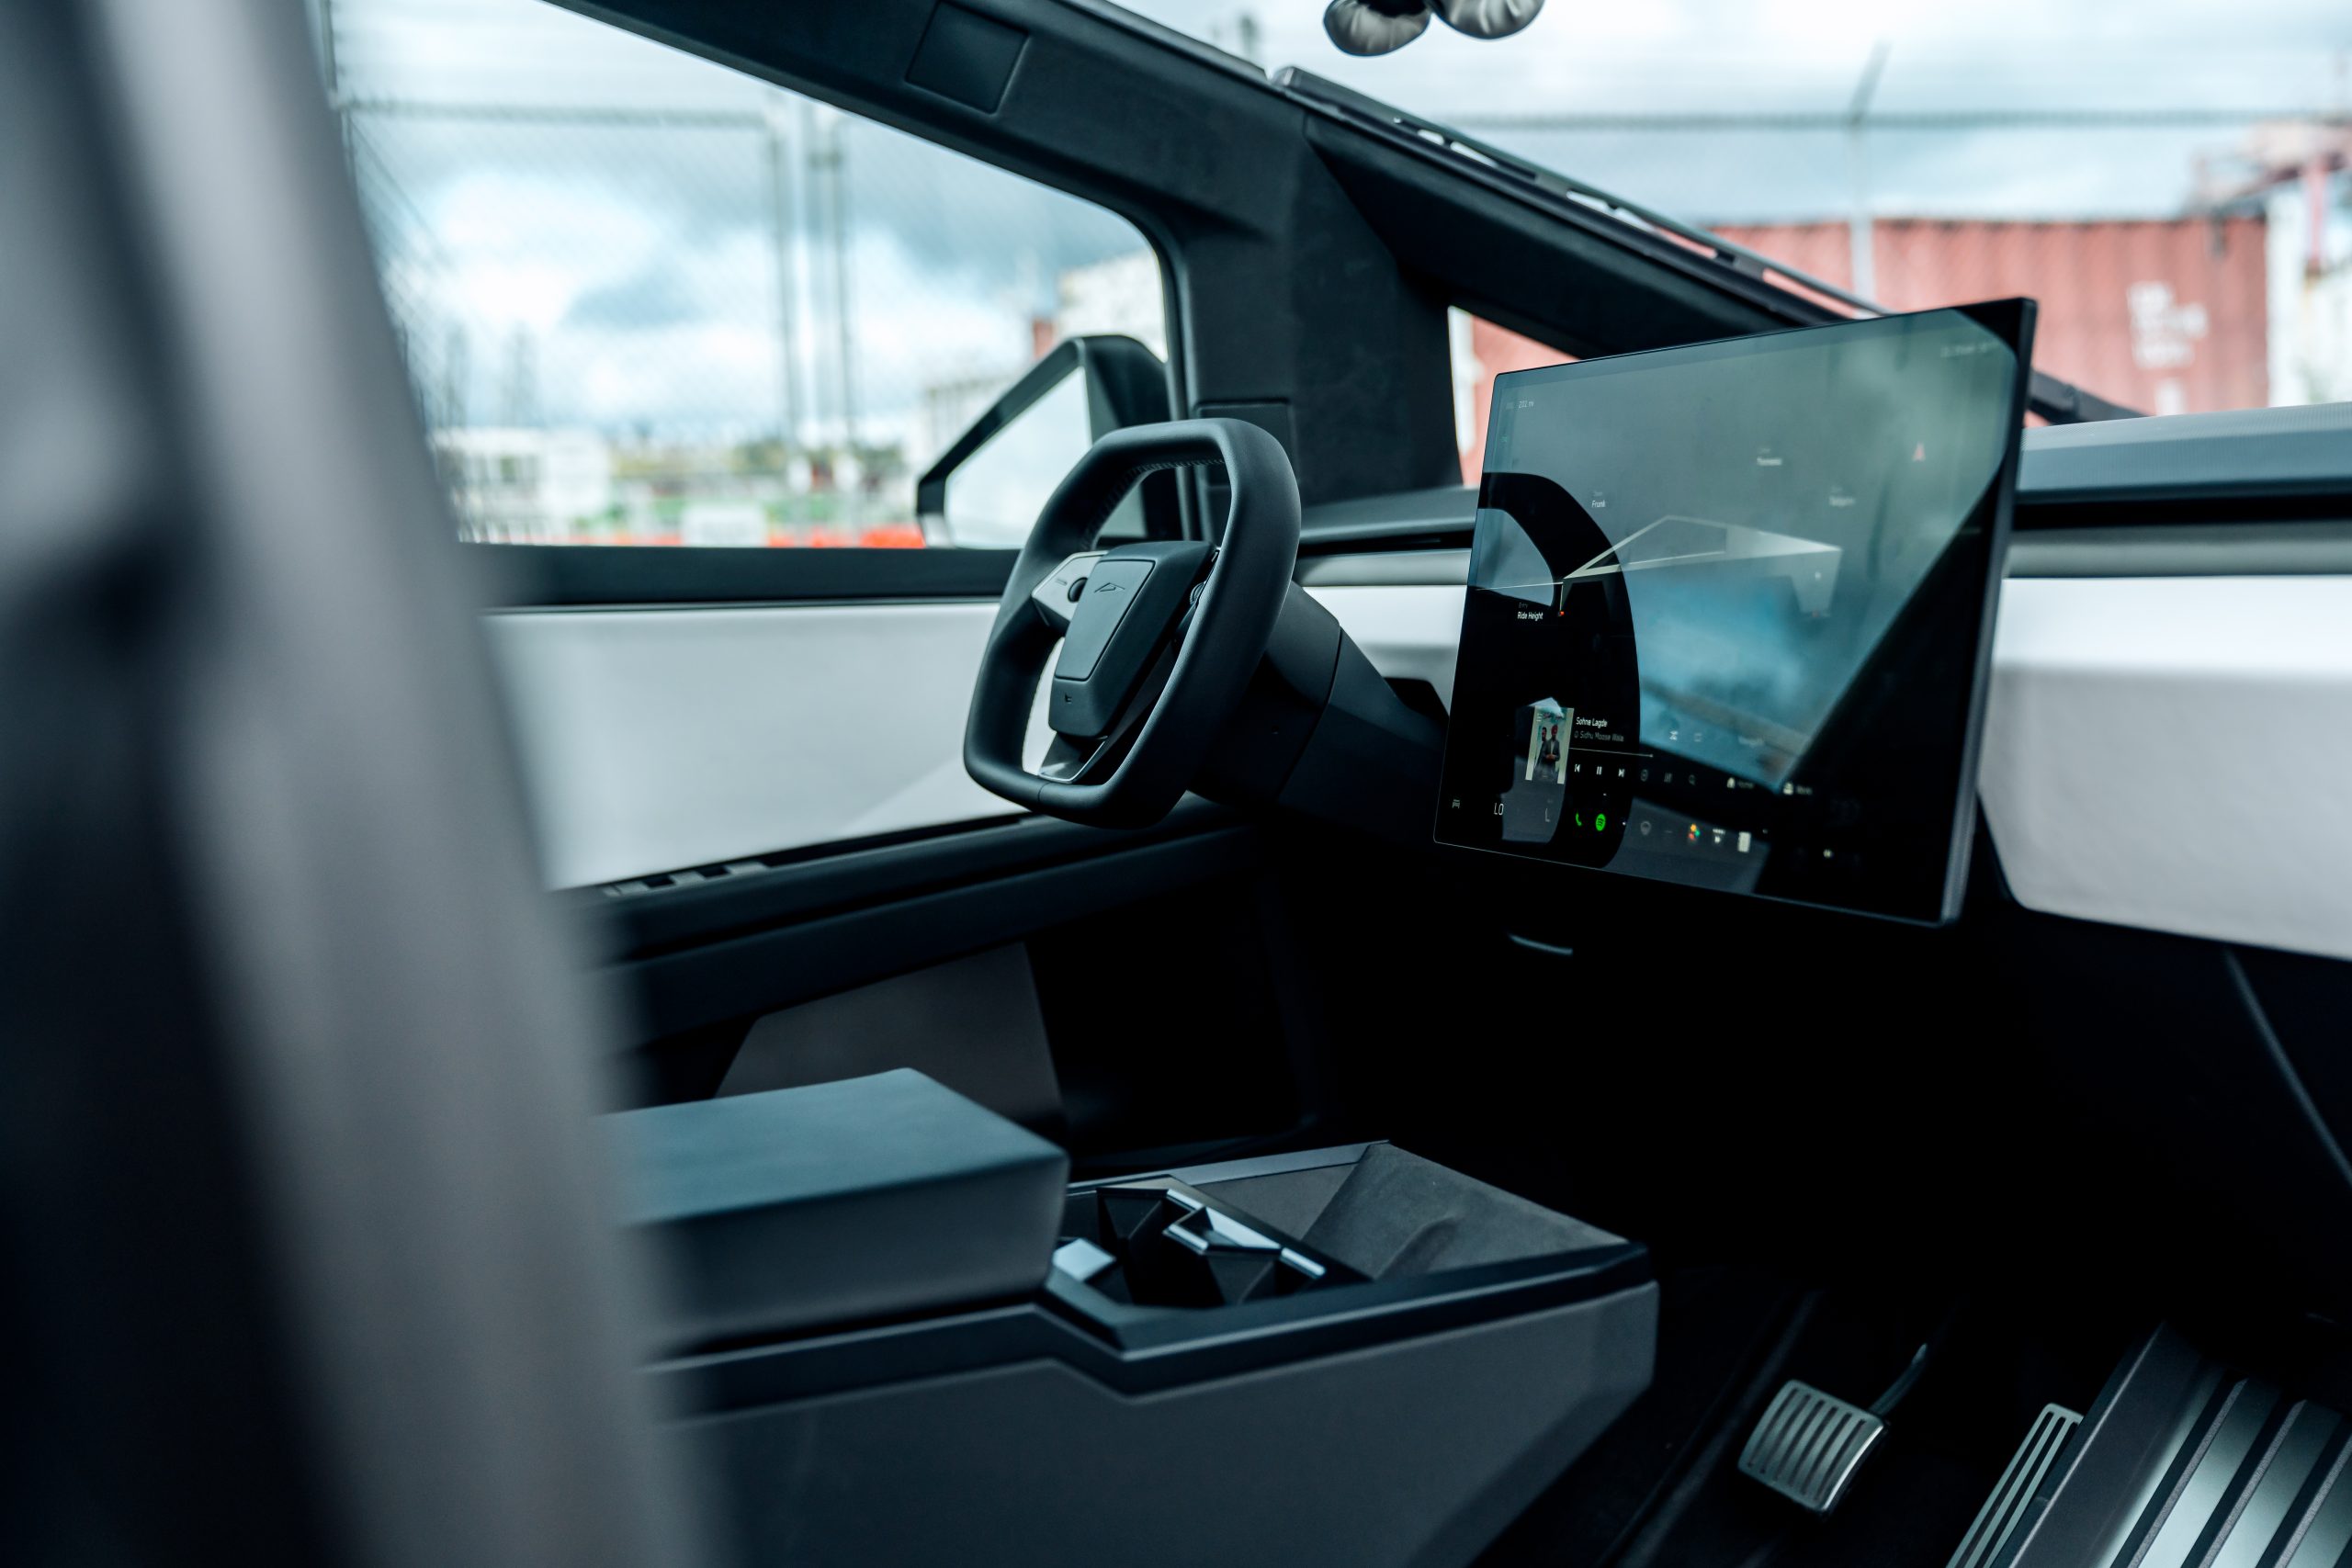 Interior of the Tesla Cybertruck, Where USB-C and USB-A Ports Can Be Found